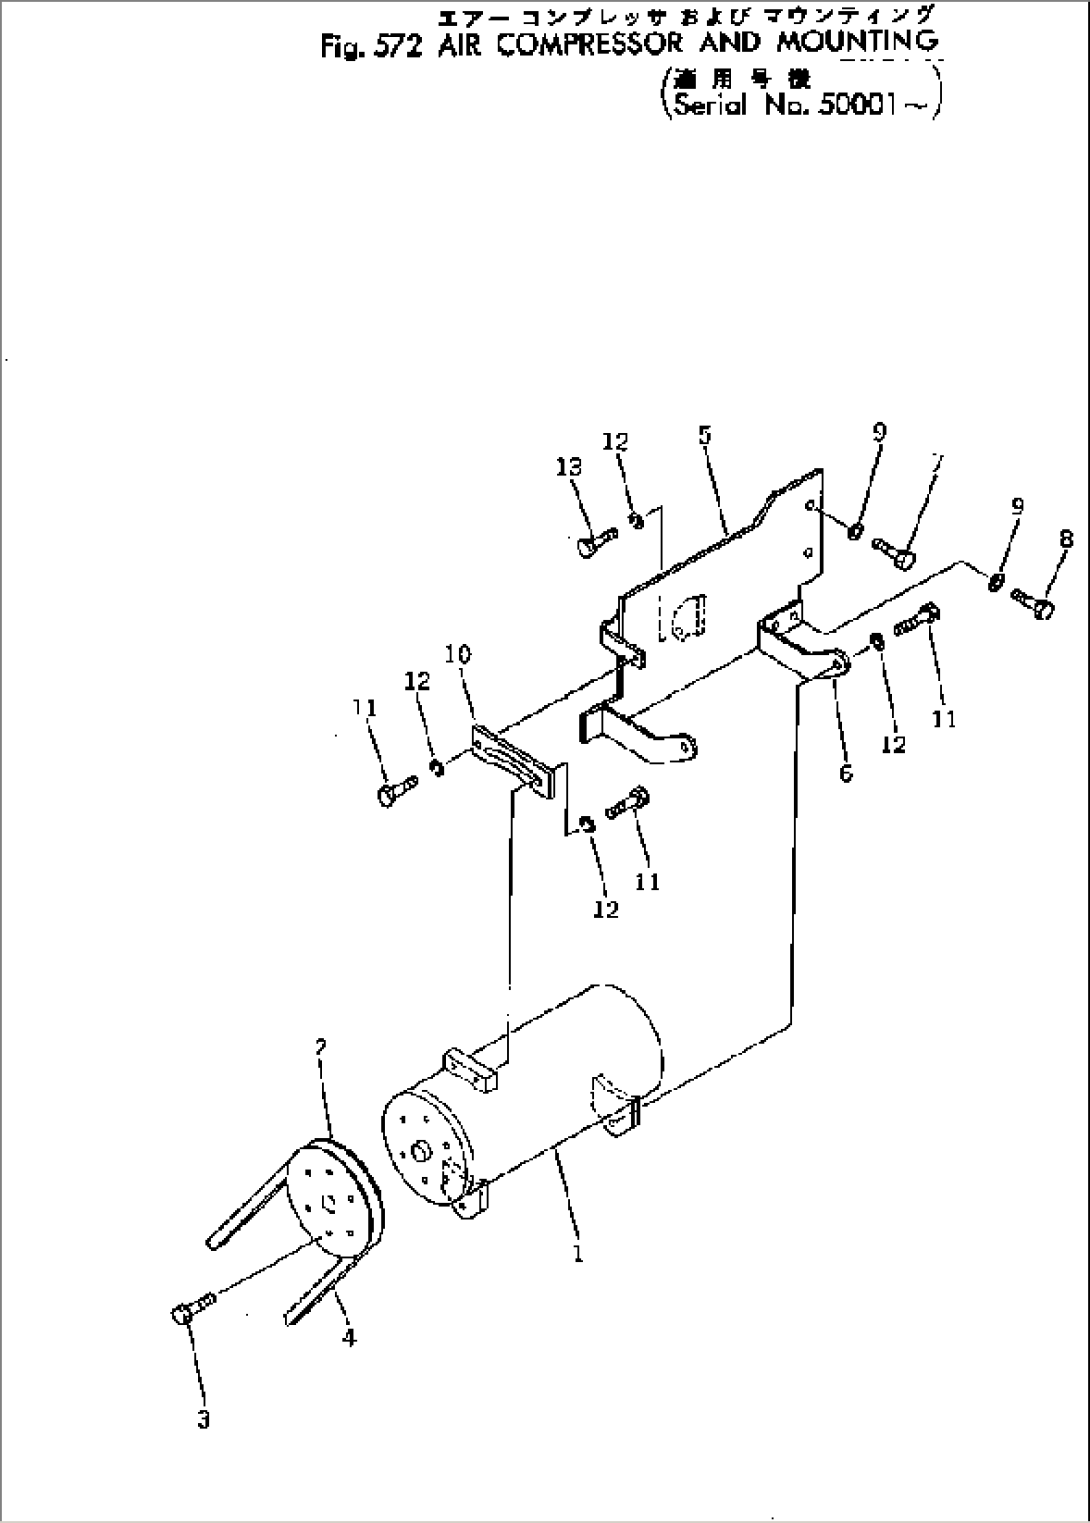 AIR COMPRESSOR AND MOUNTING(#50001-)